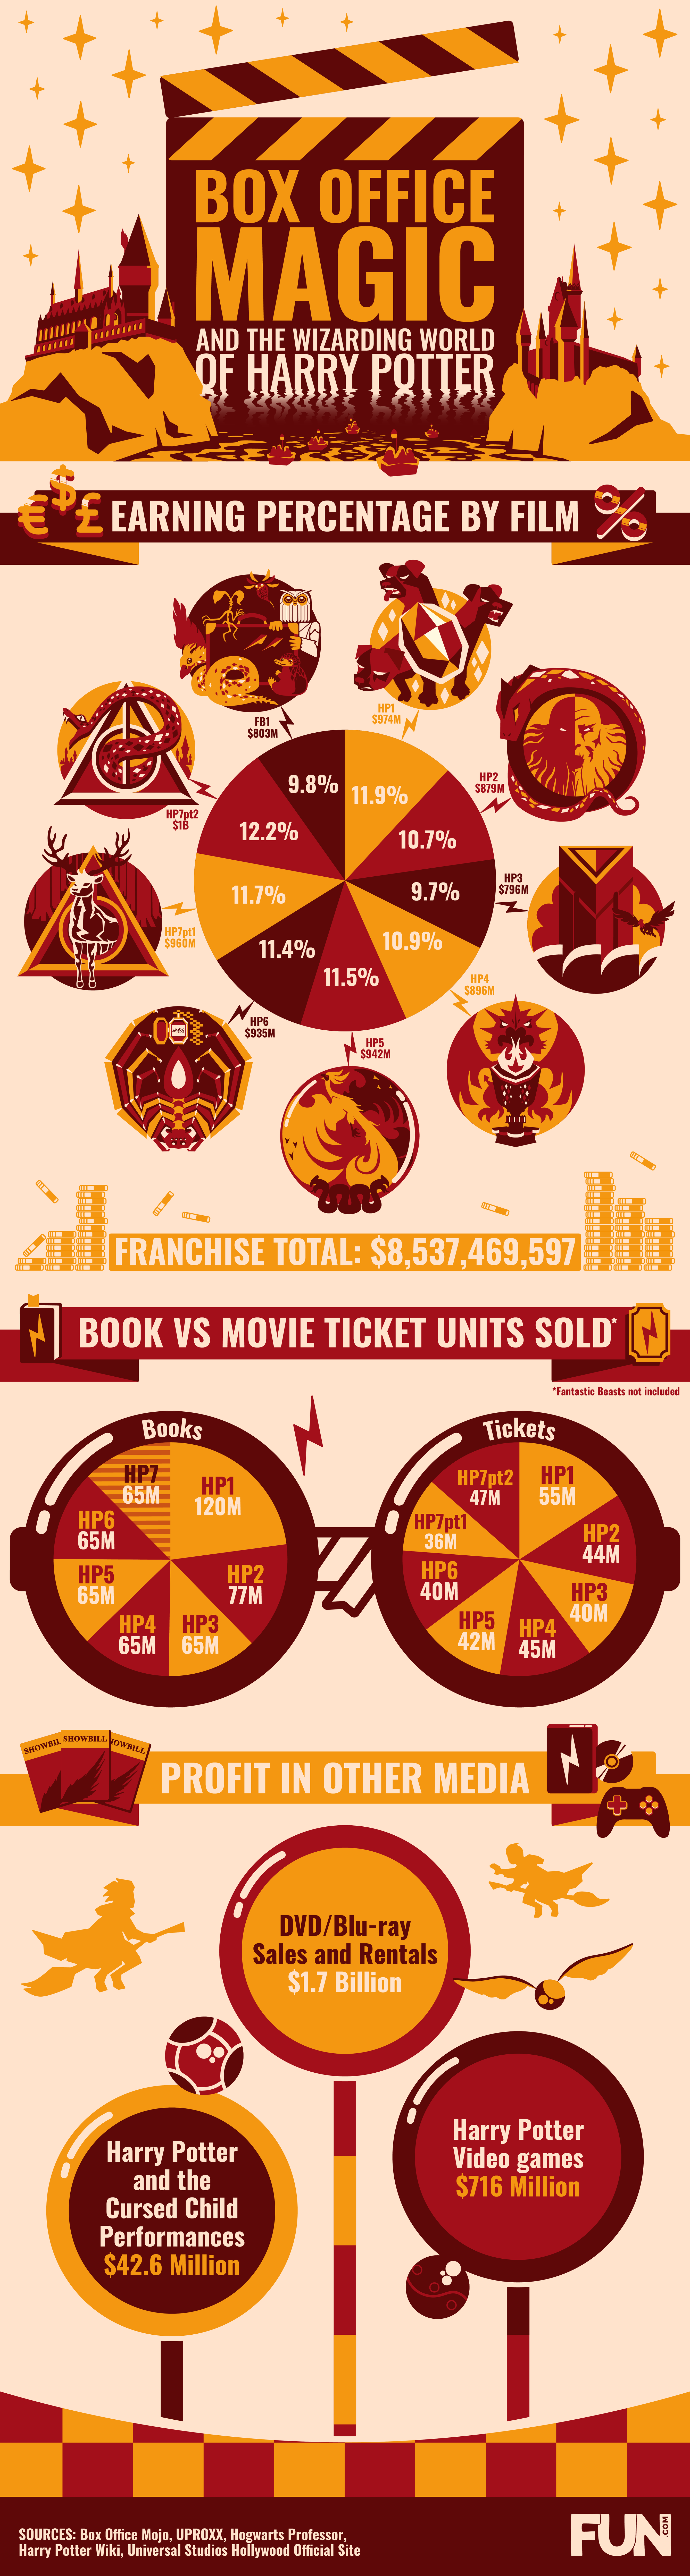 Box Office Magic and the Wizarding World of Harry Potter 